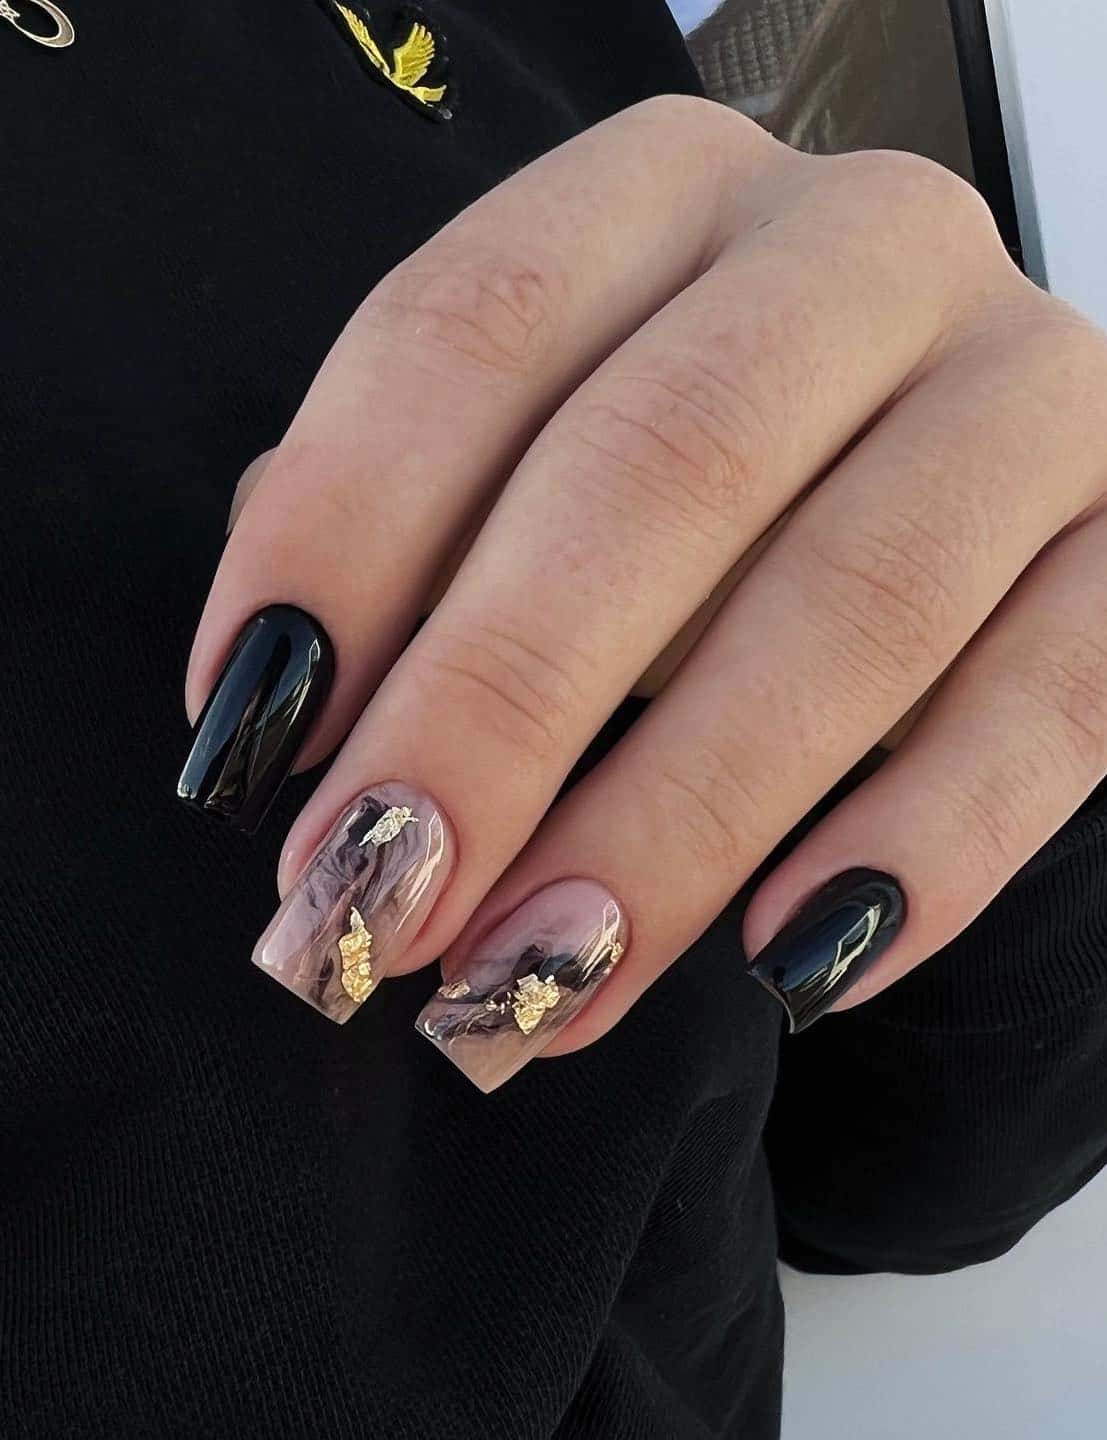 Medium square nails with glossy black polish and nude and black marbled accent nails with gold flakes